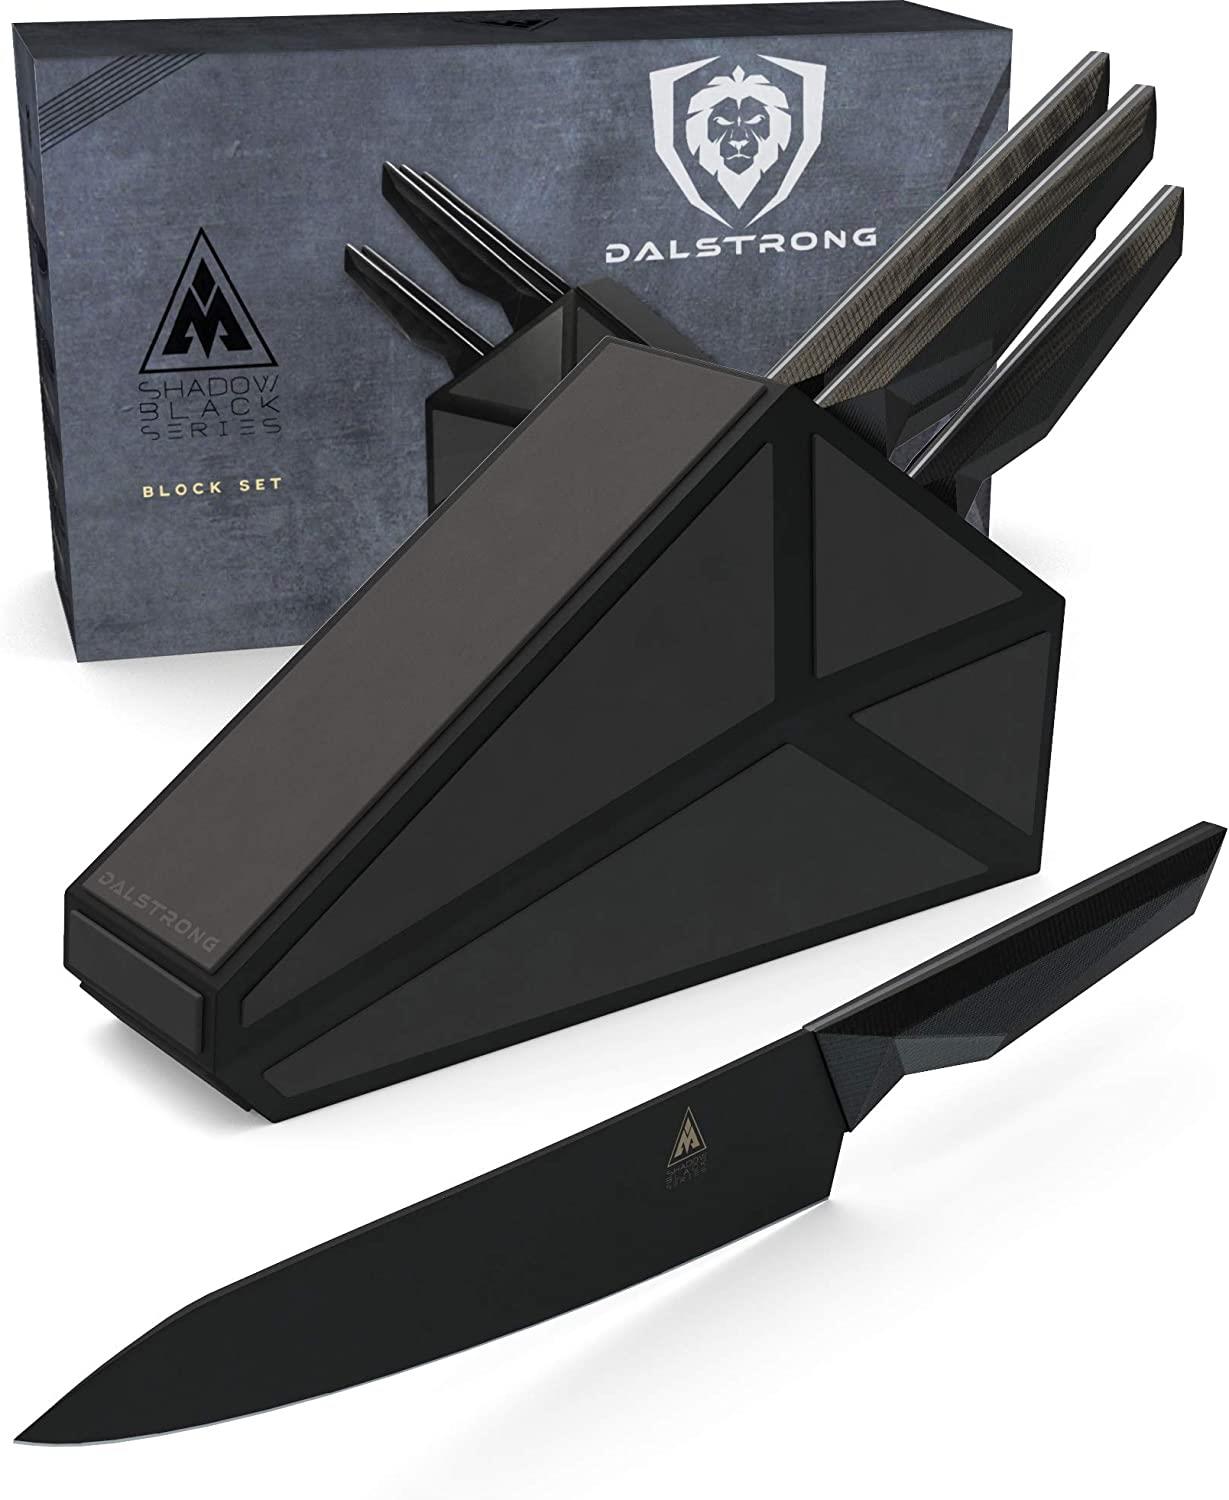 Dalstrong 5-Piece Knife Set with Storage Block - High Carbon Steel